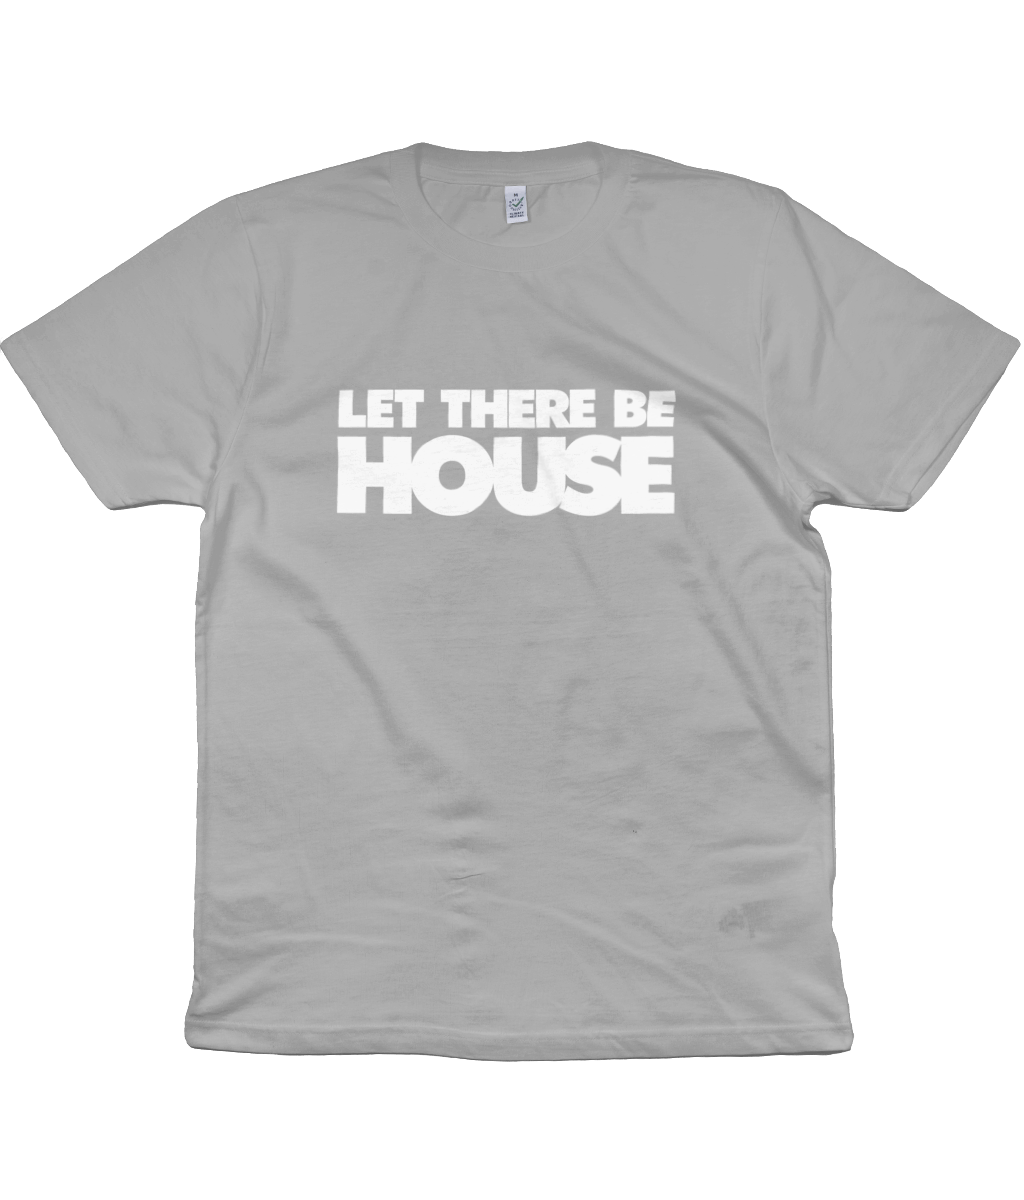 T-Shirt LTBH Words